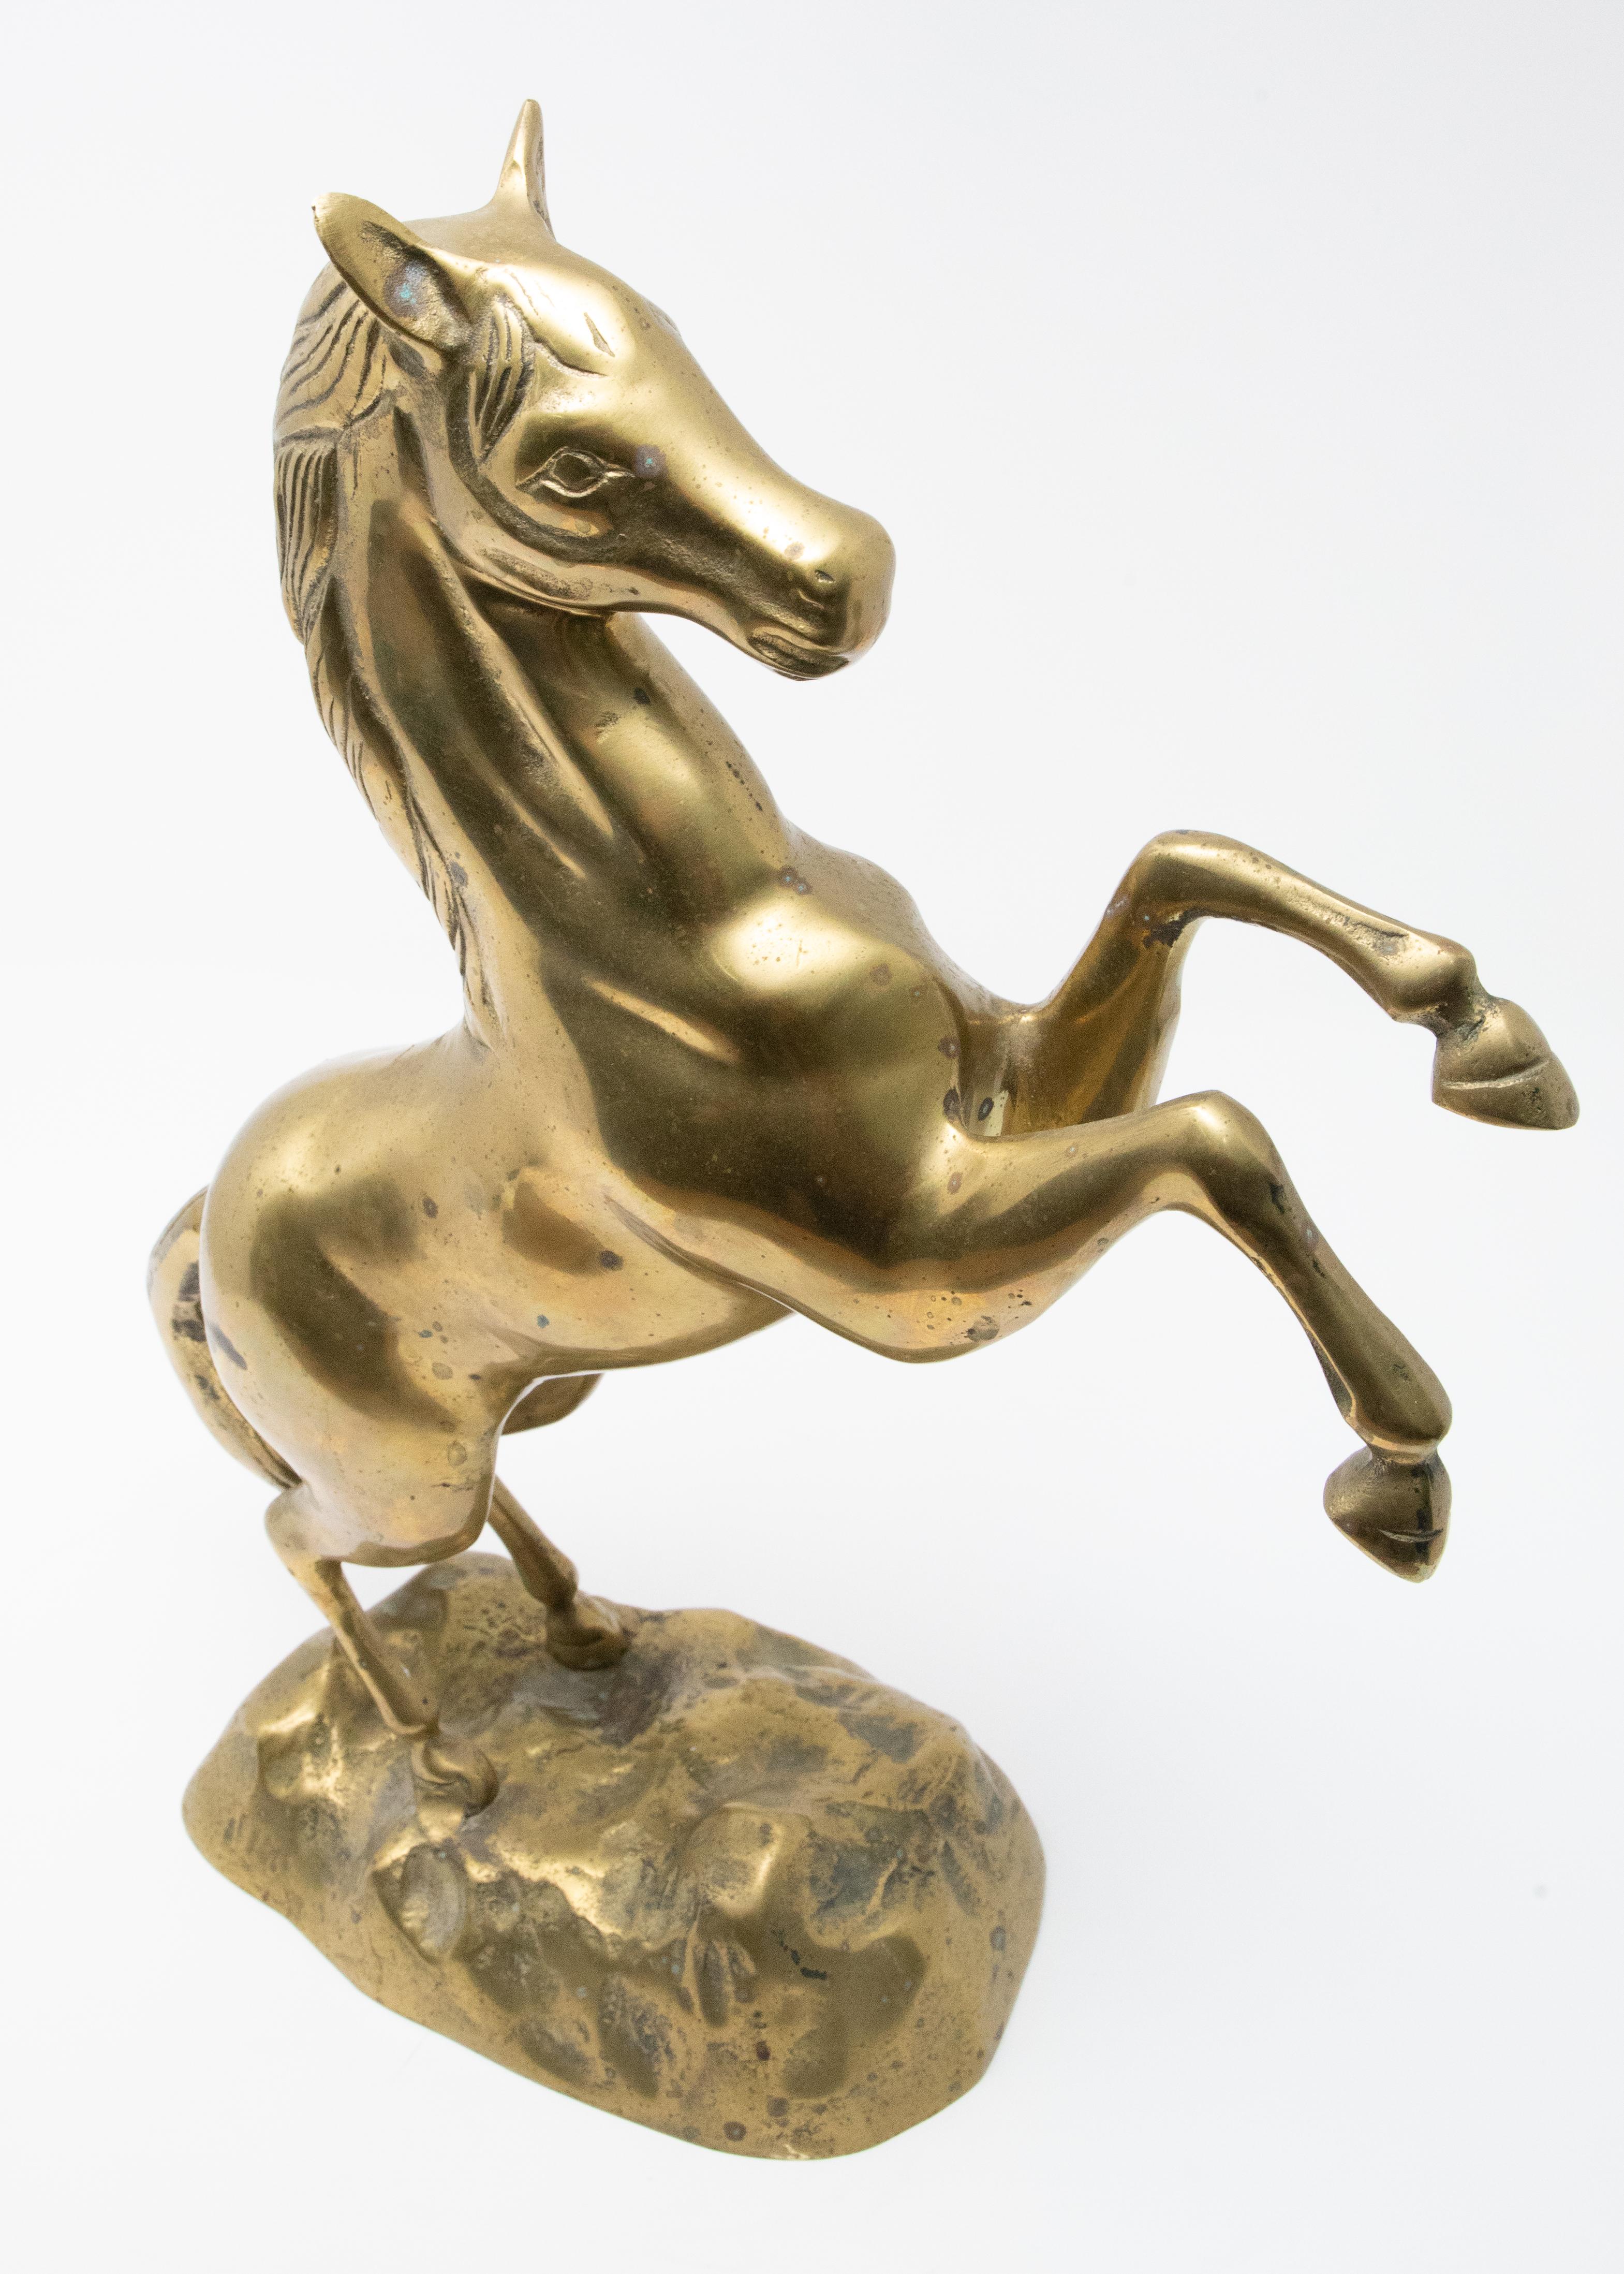 Beautiful sculpture of a raring horse out of brass. Starting on the base the two hind legs standing on the ground with engraving in the brass to look like grass. The tail is long and swooshes downward. Up the back of the horse to the mane and the